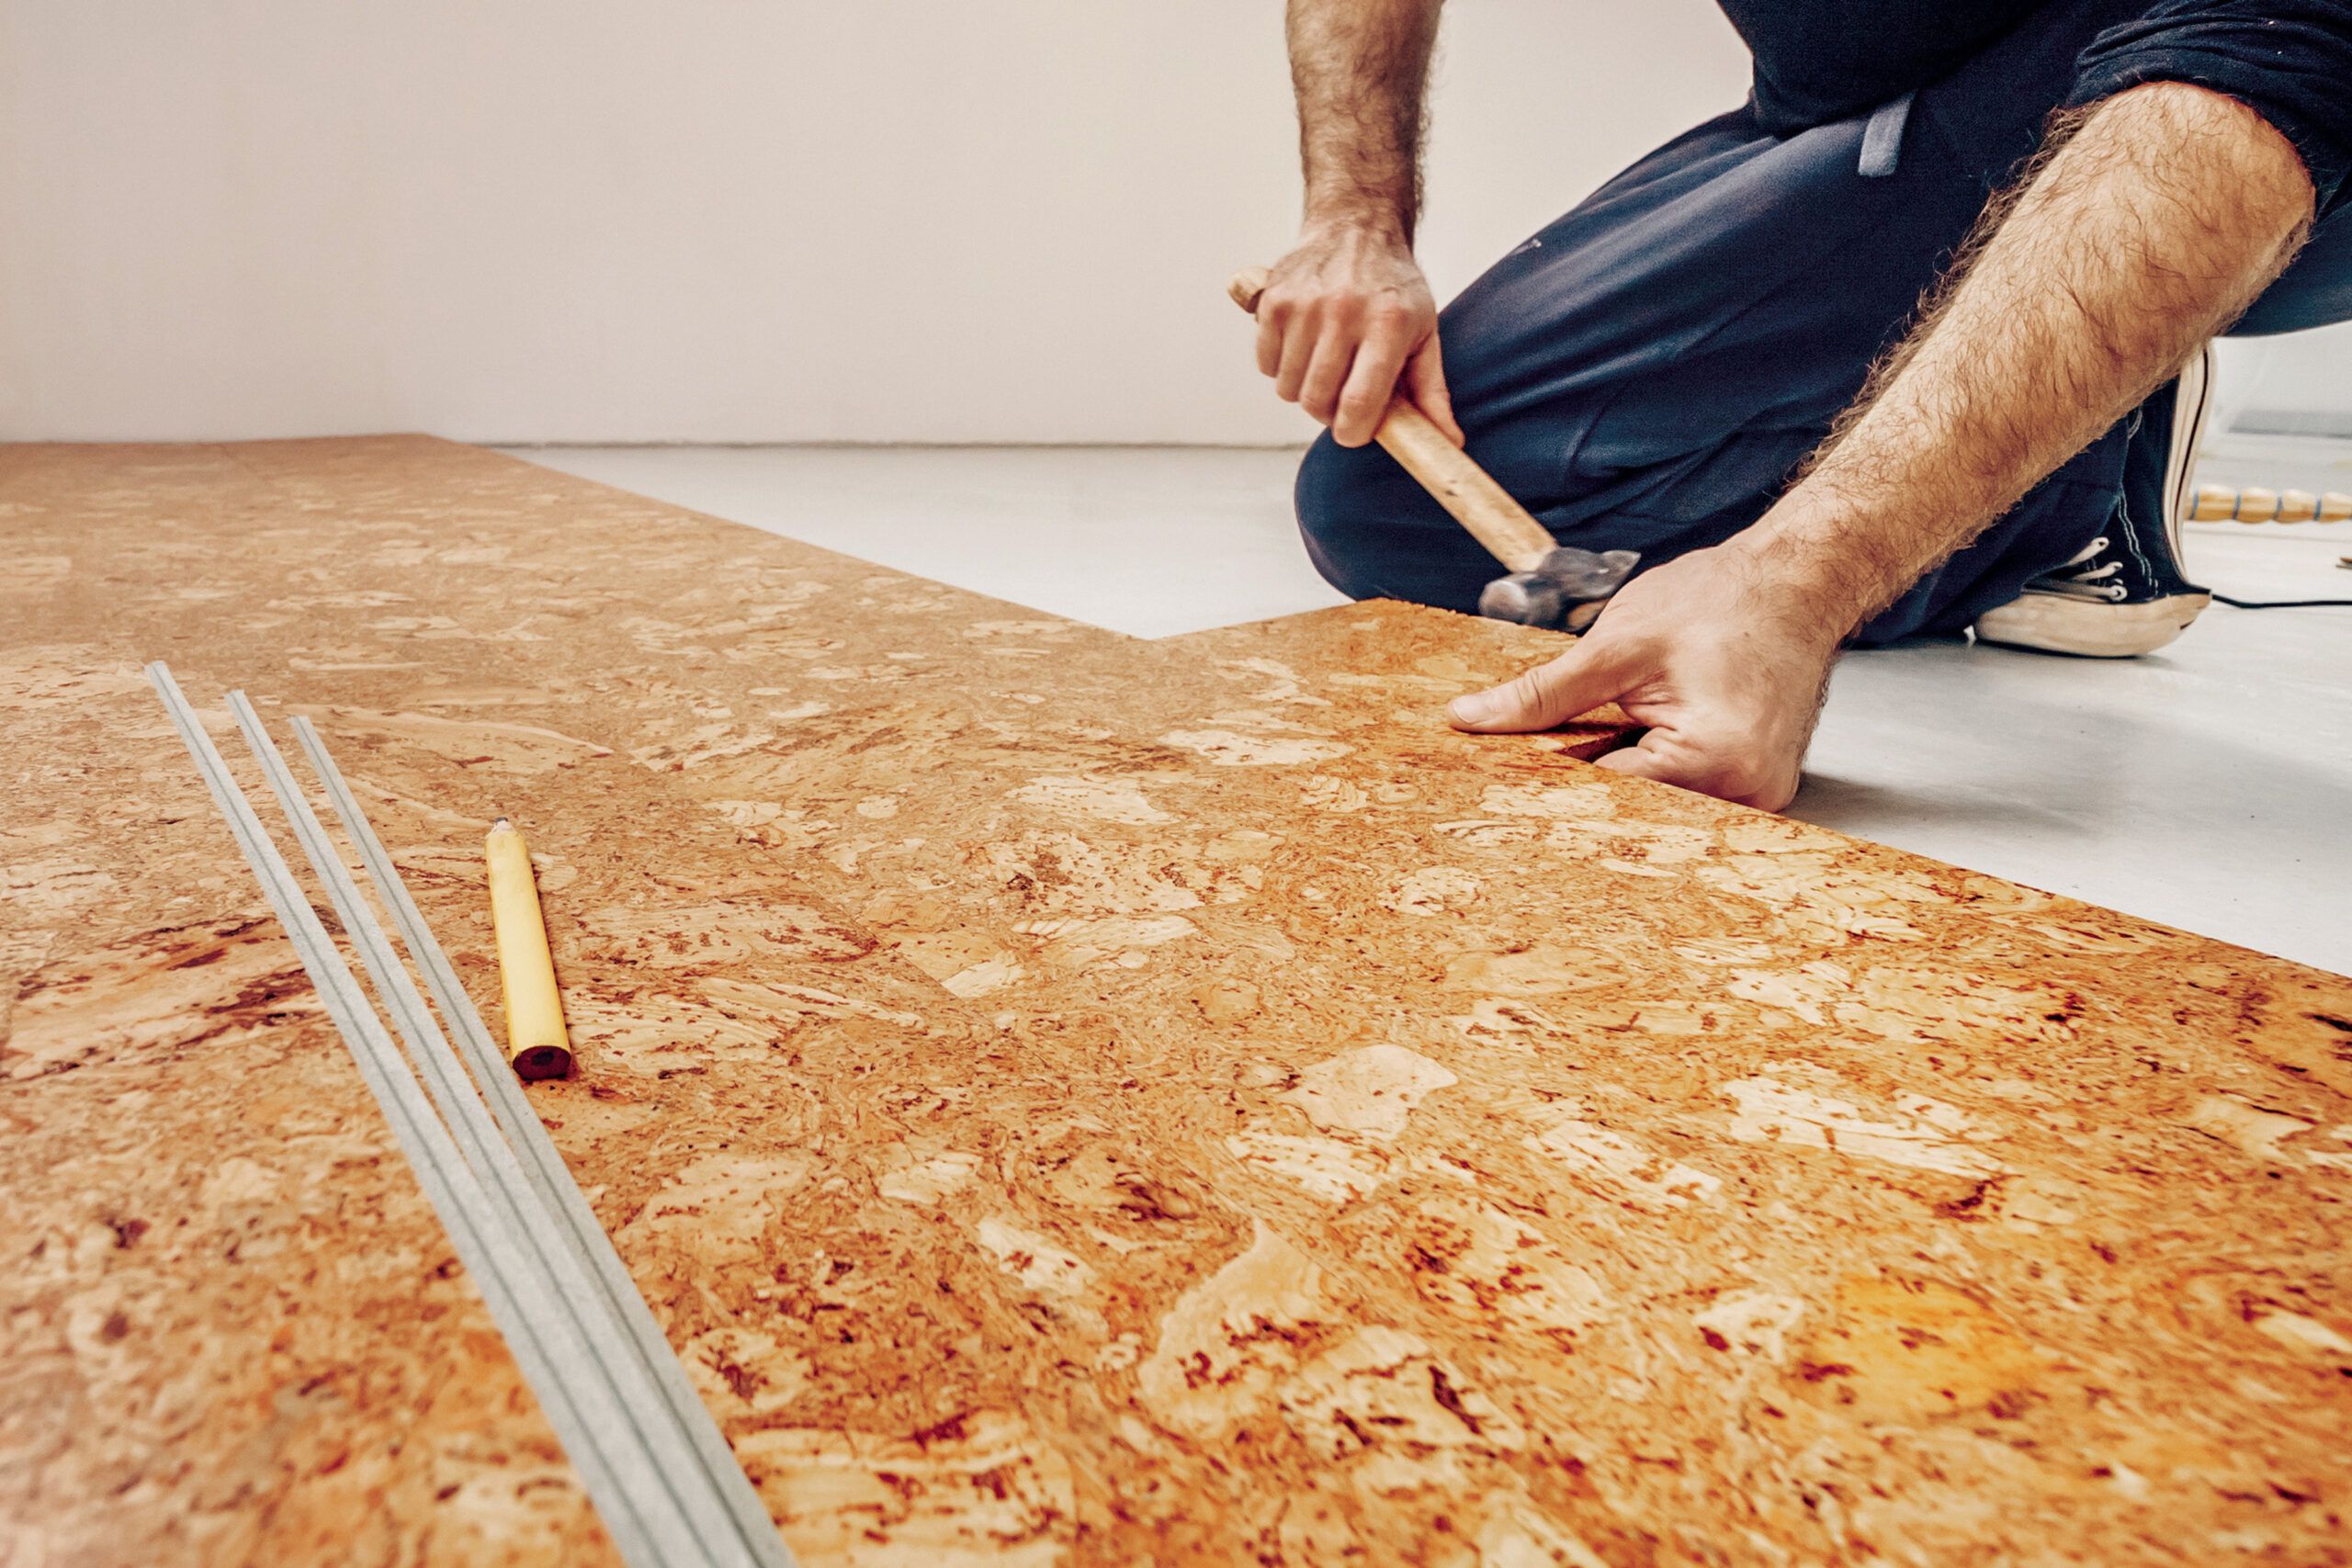 Cork Flooring 101: Cost, Types, & Installation - This Old House